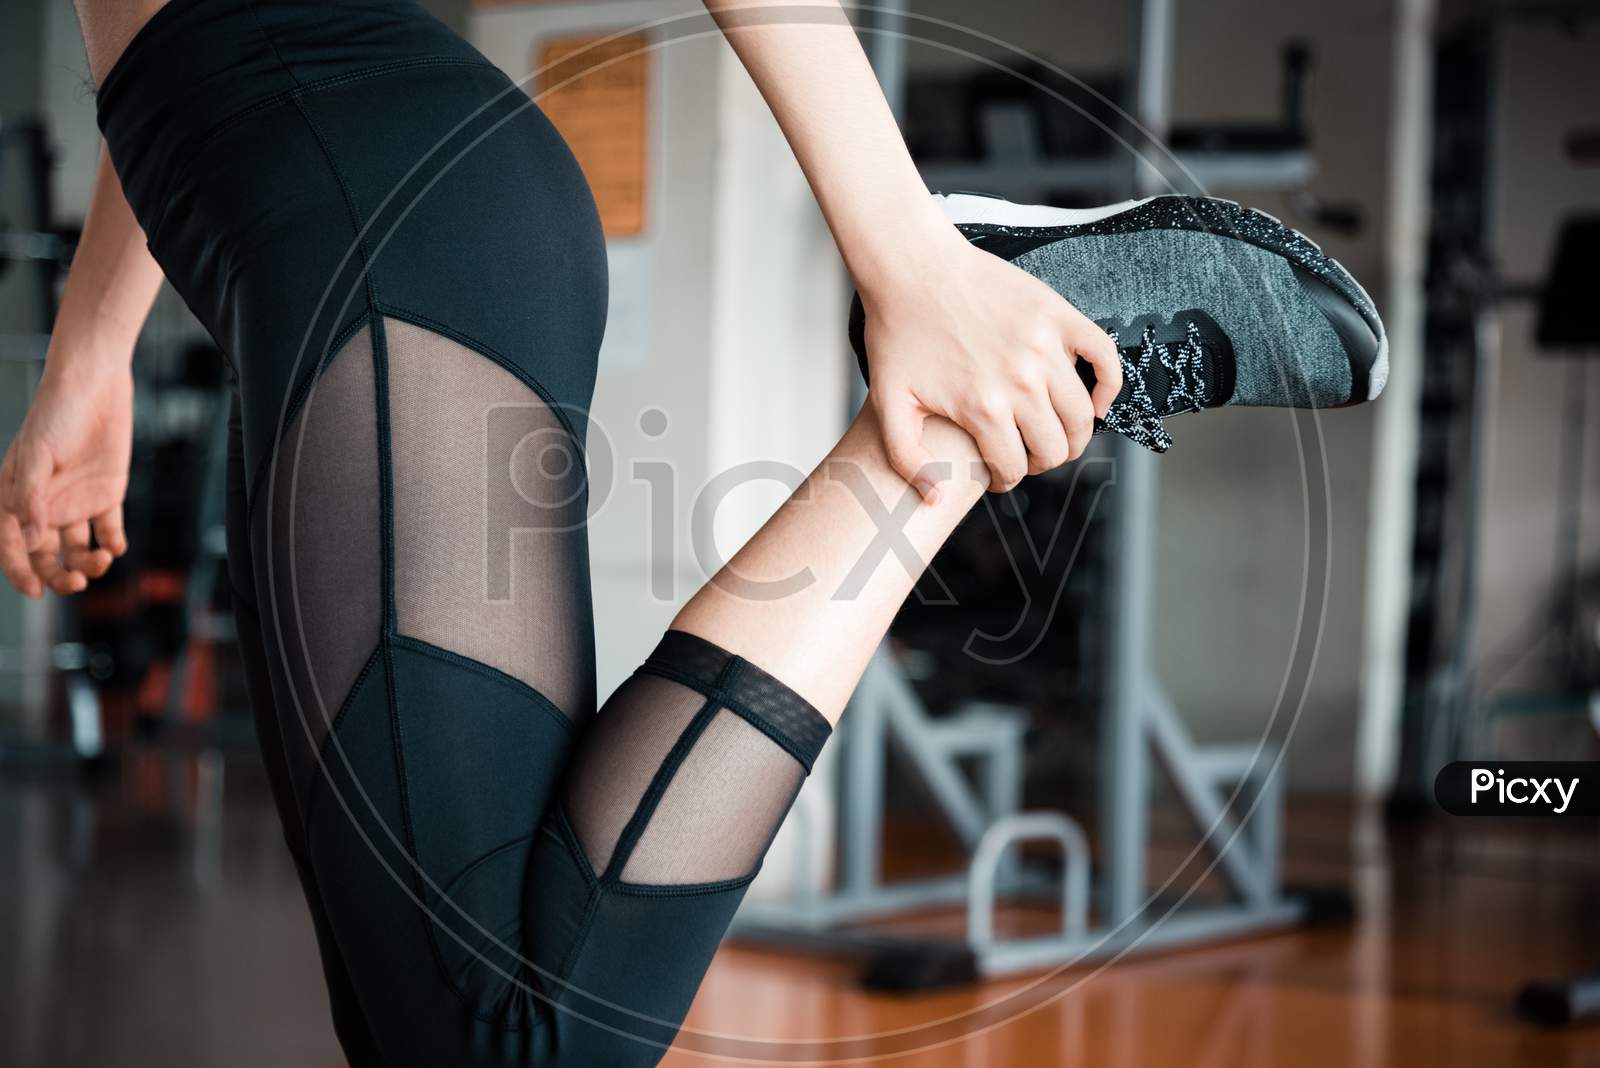 Legs Stretching By Hands Before Workout And Exercise. Sports And Healthcare Concept. Beauty And Weight Loss Concept. Fitness Gym And Sports Club Theme